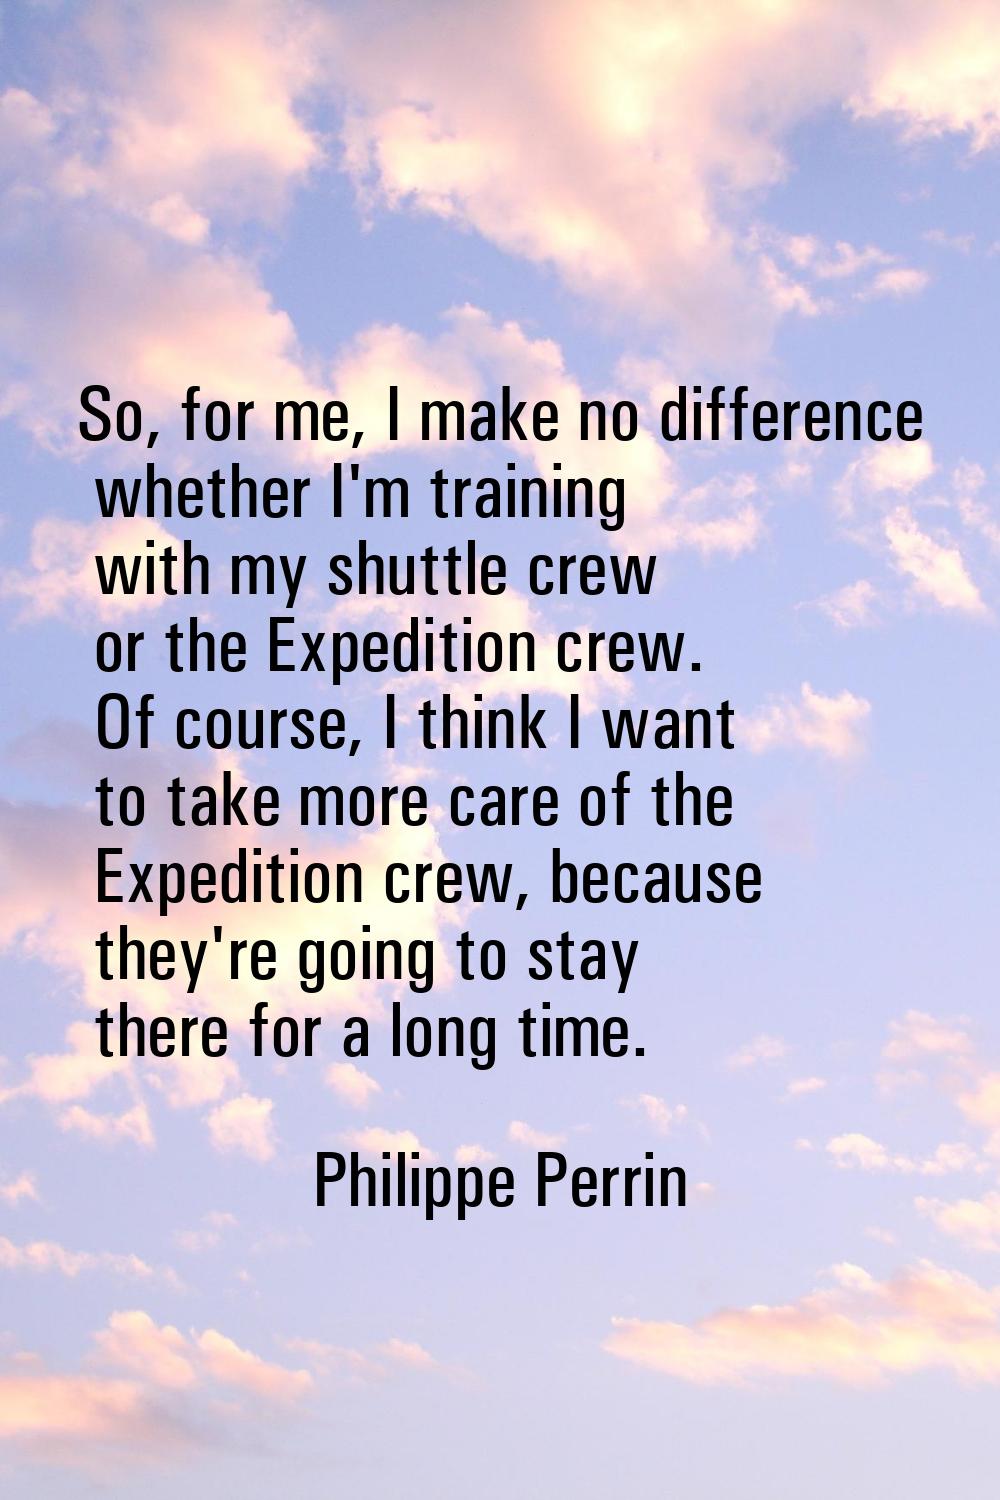 So, for me, I make no difference whether I'm training with my shuttle crew or the Expedition crew. 